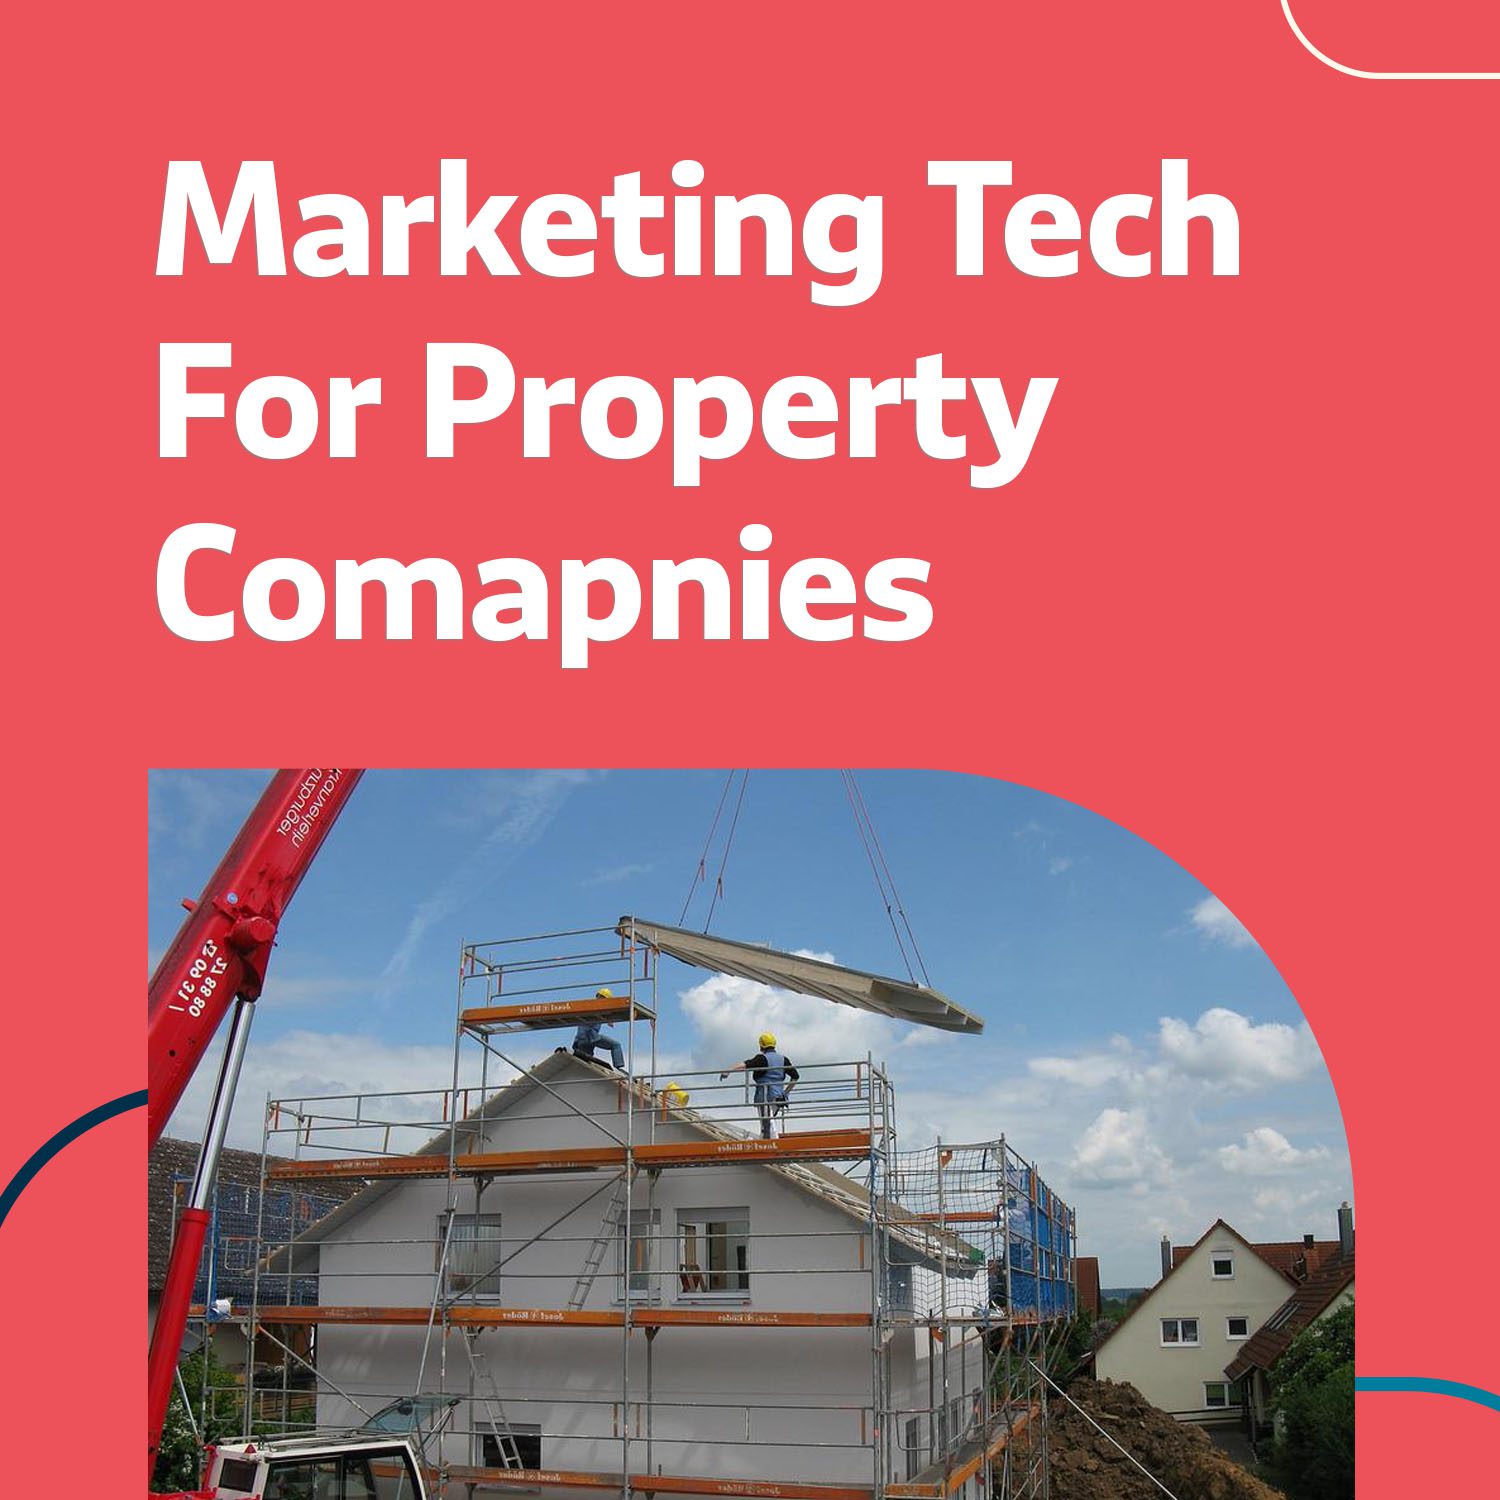 Marketing Technologies for Property Business